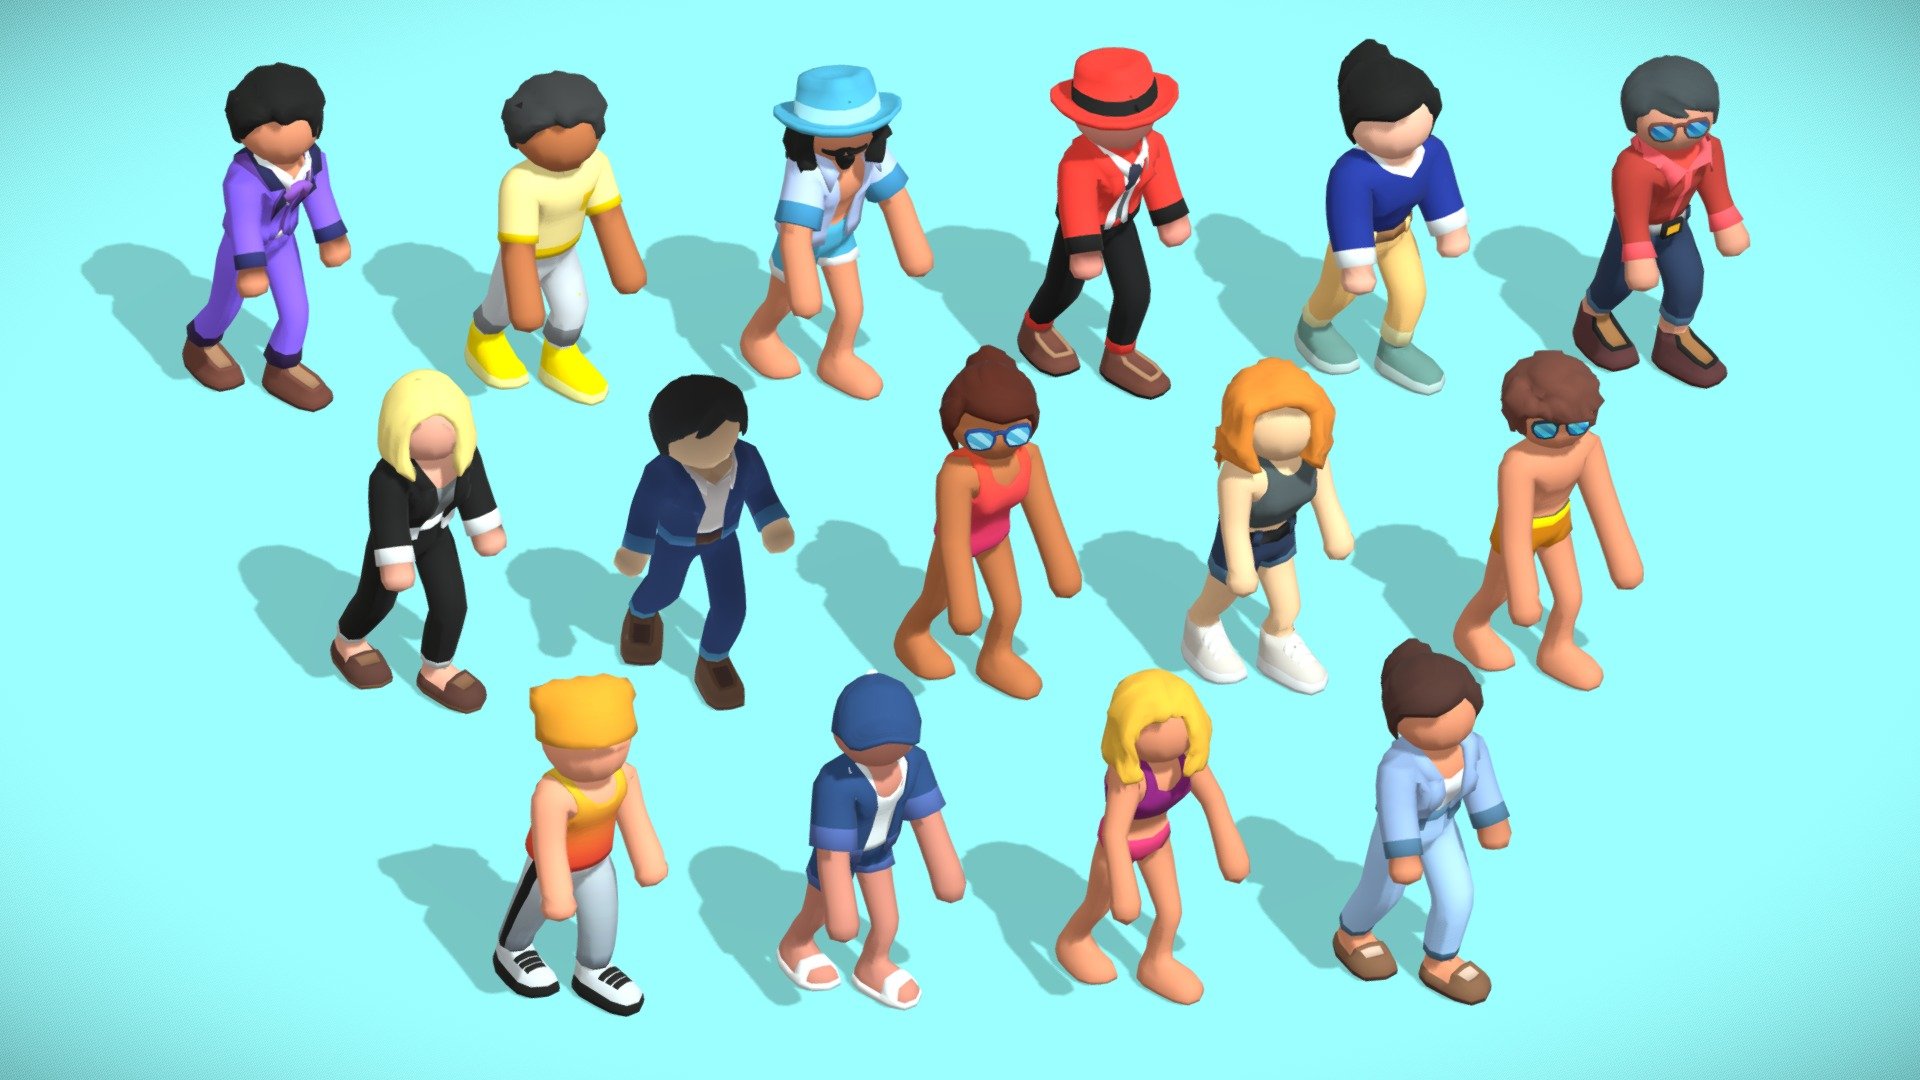 Prepare to embark on a pixelated adventure like no other with our &ldquo;HyperCasual Animated Game Characters Pack